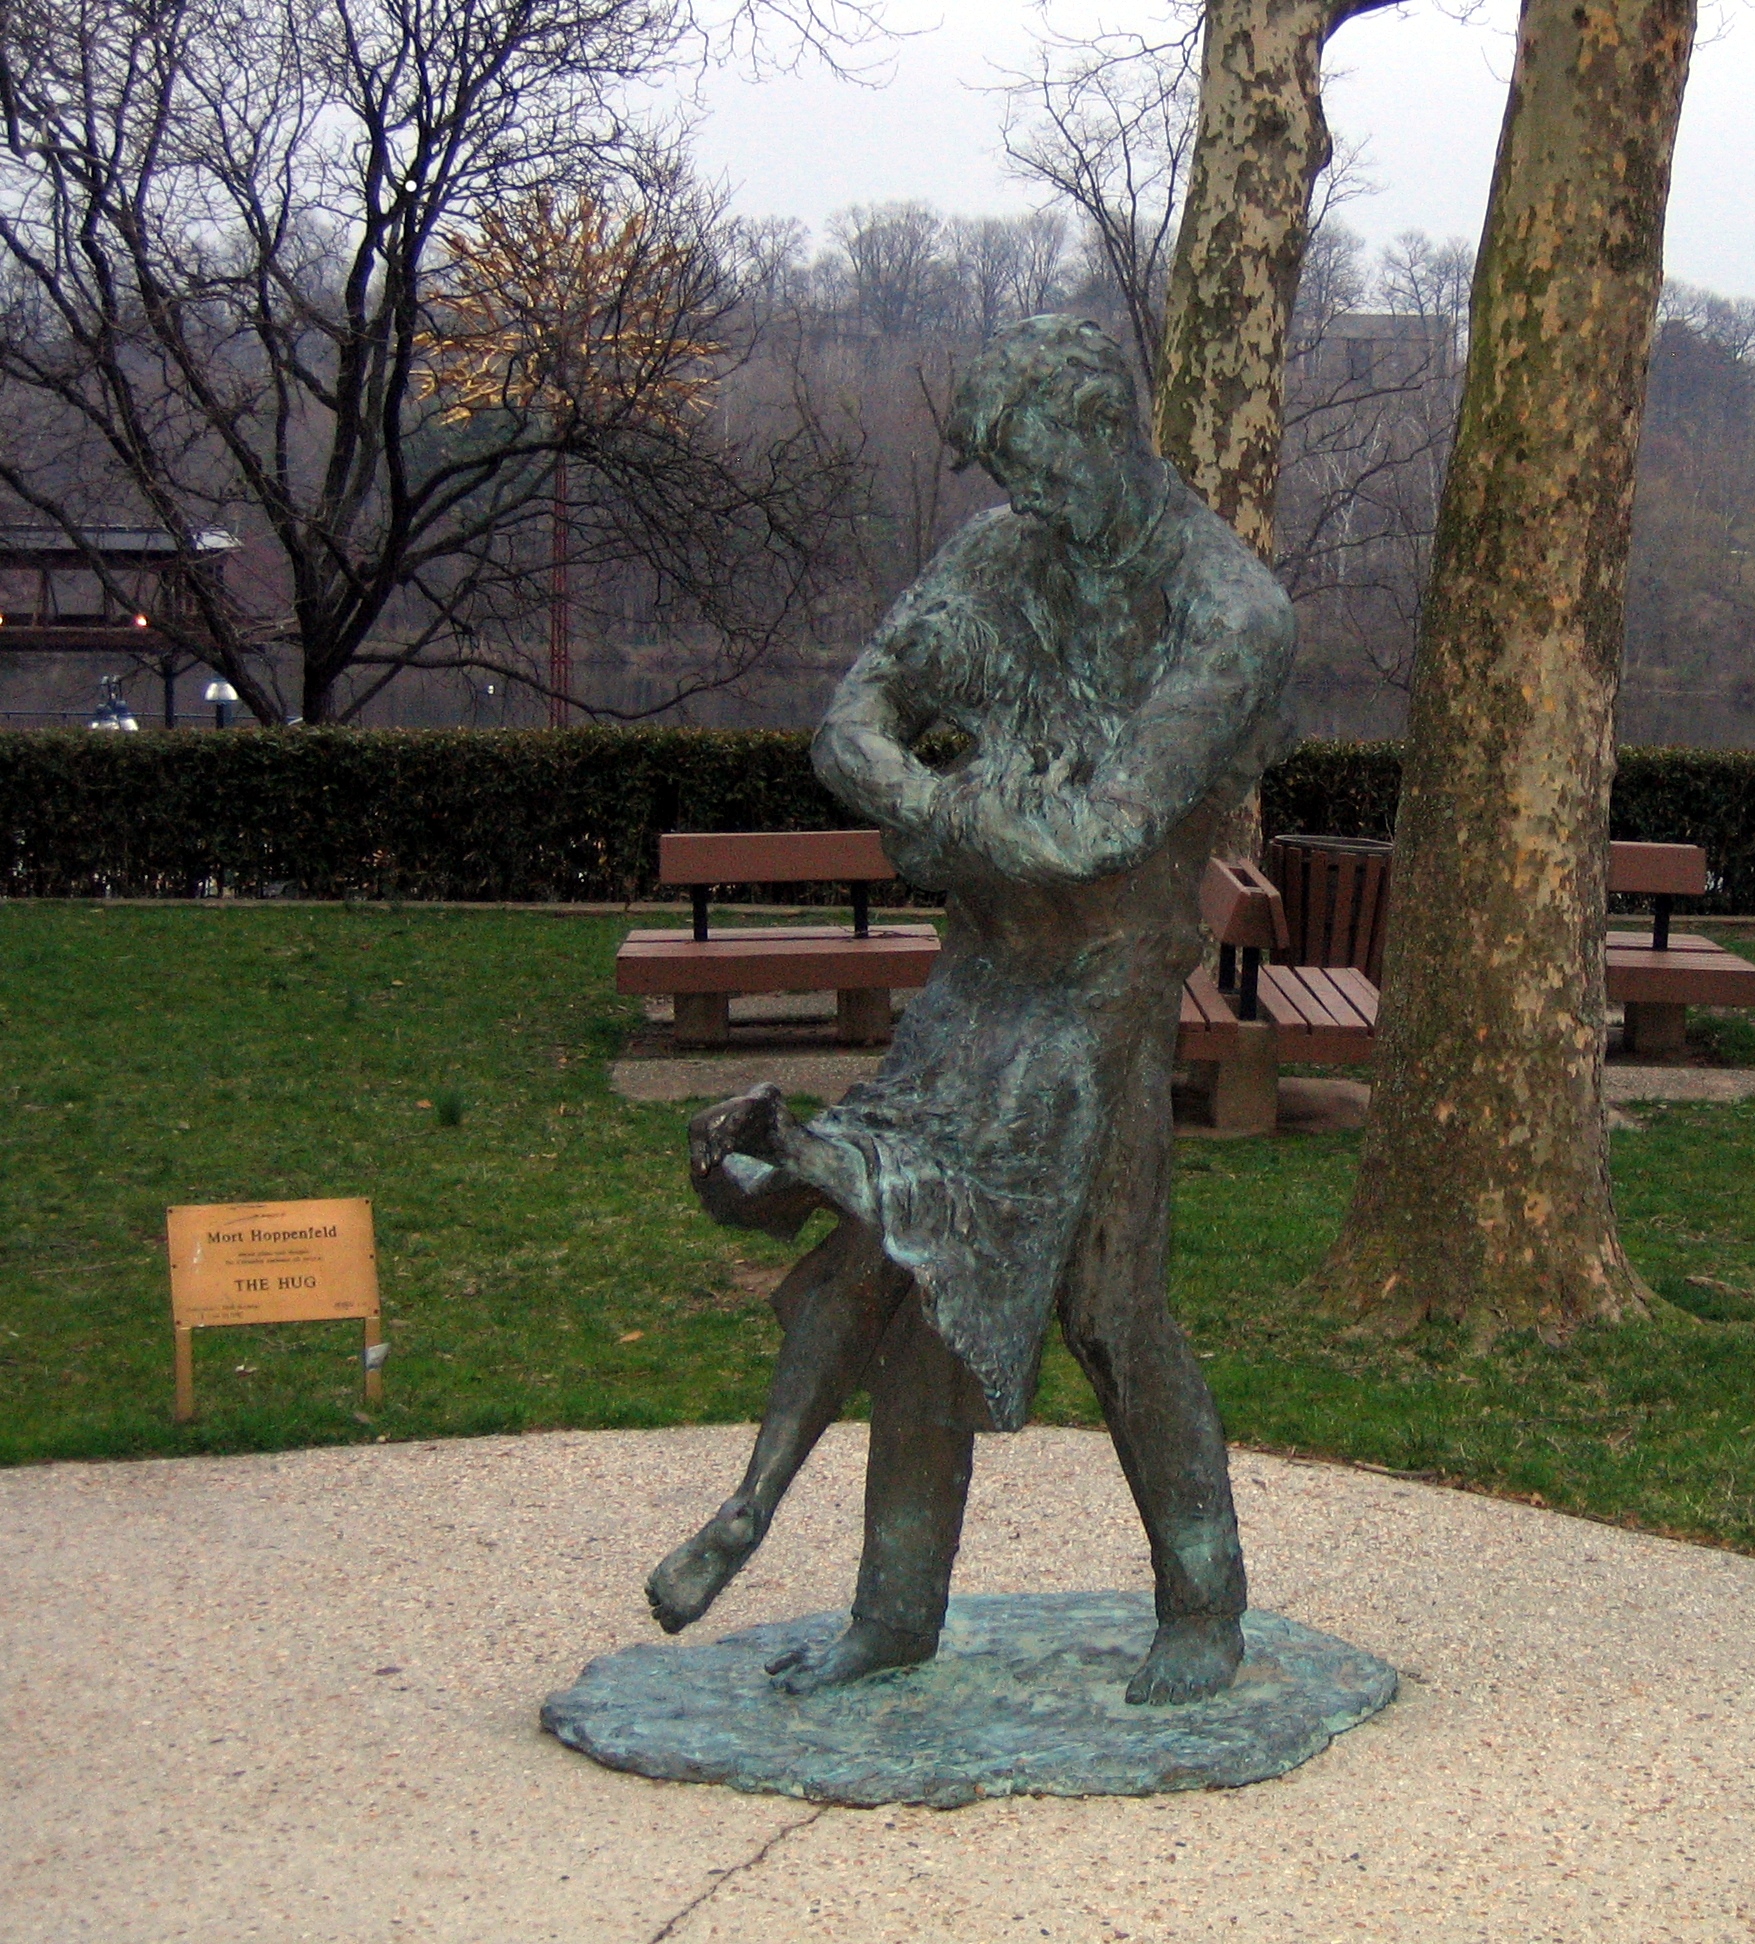 a statue in a park near benches and trees